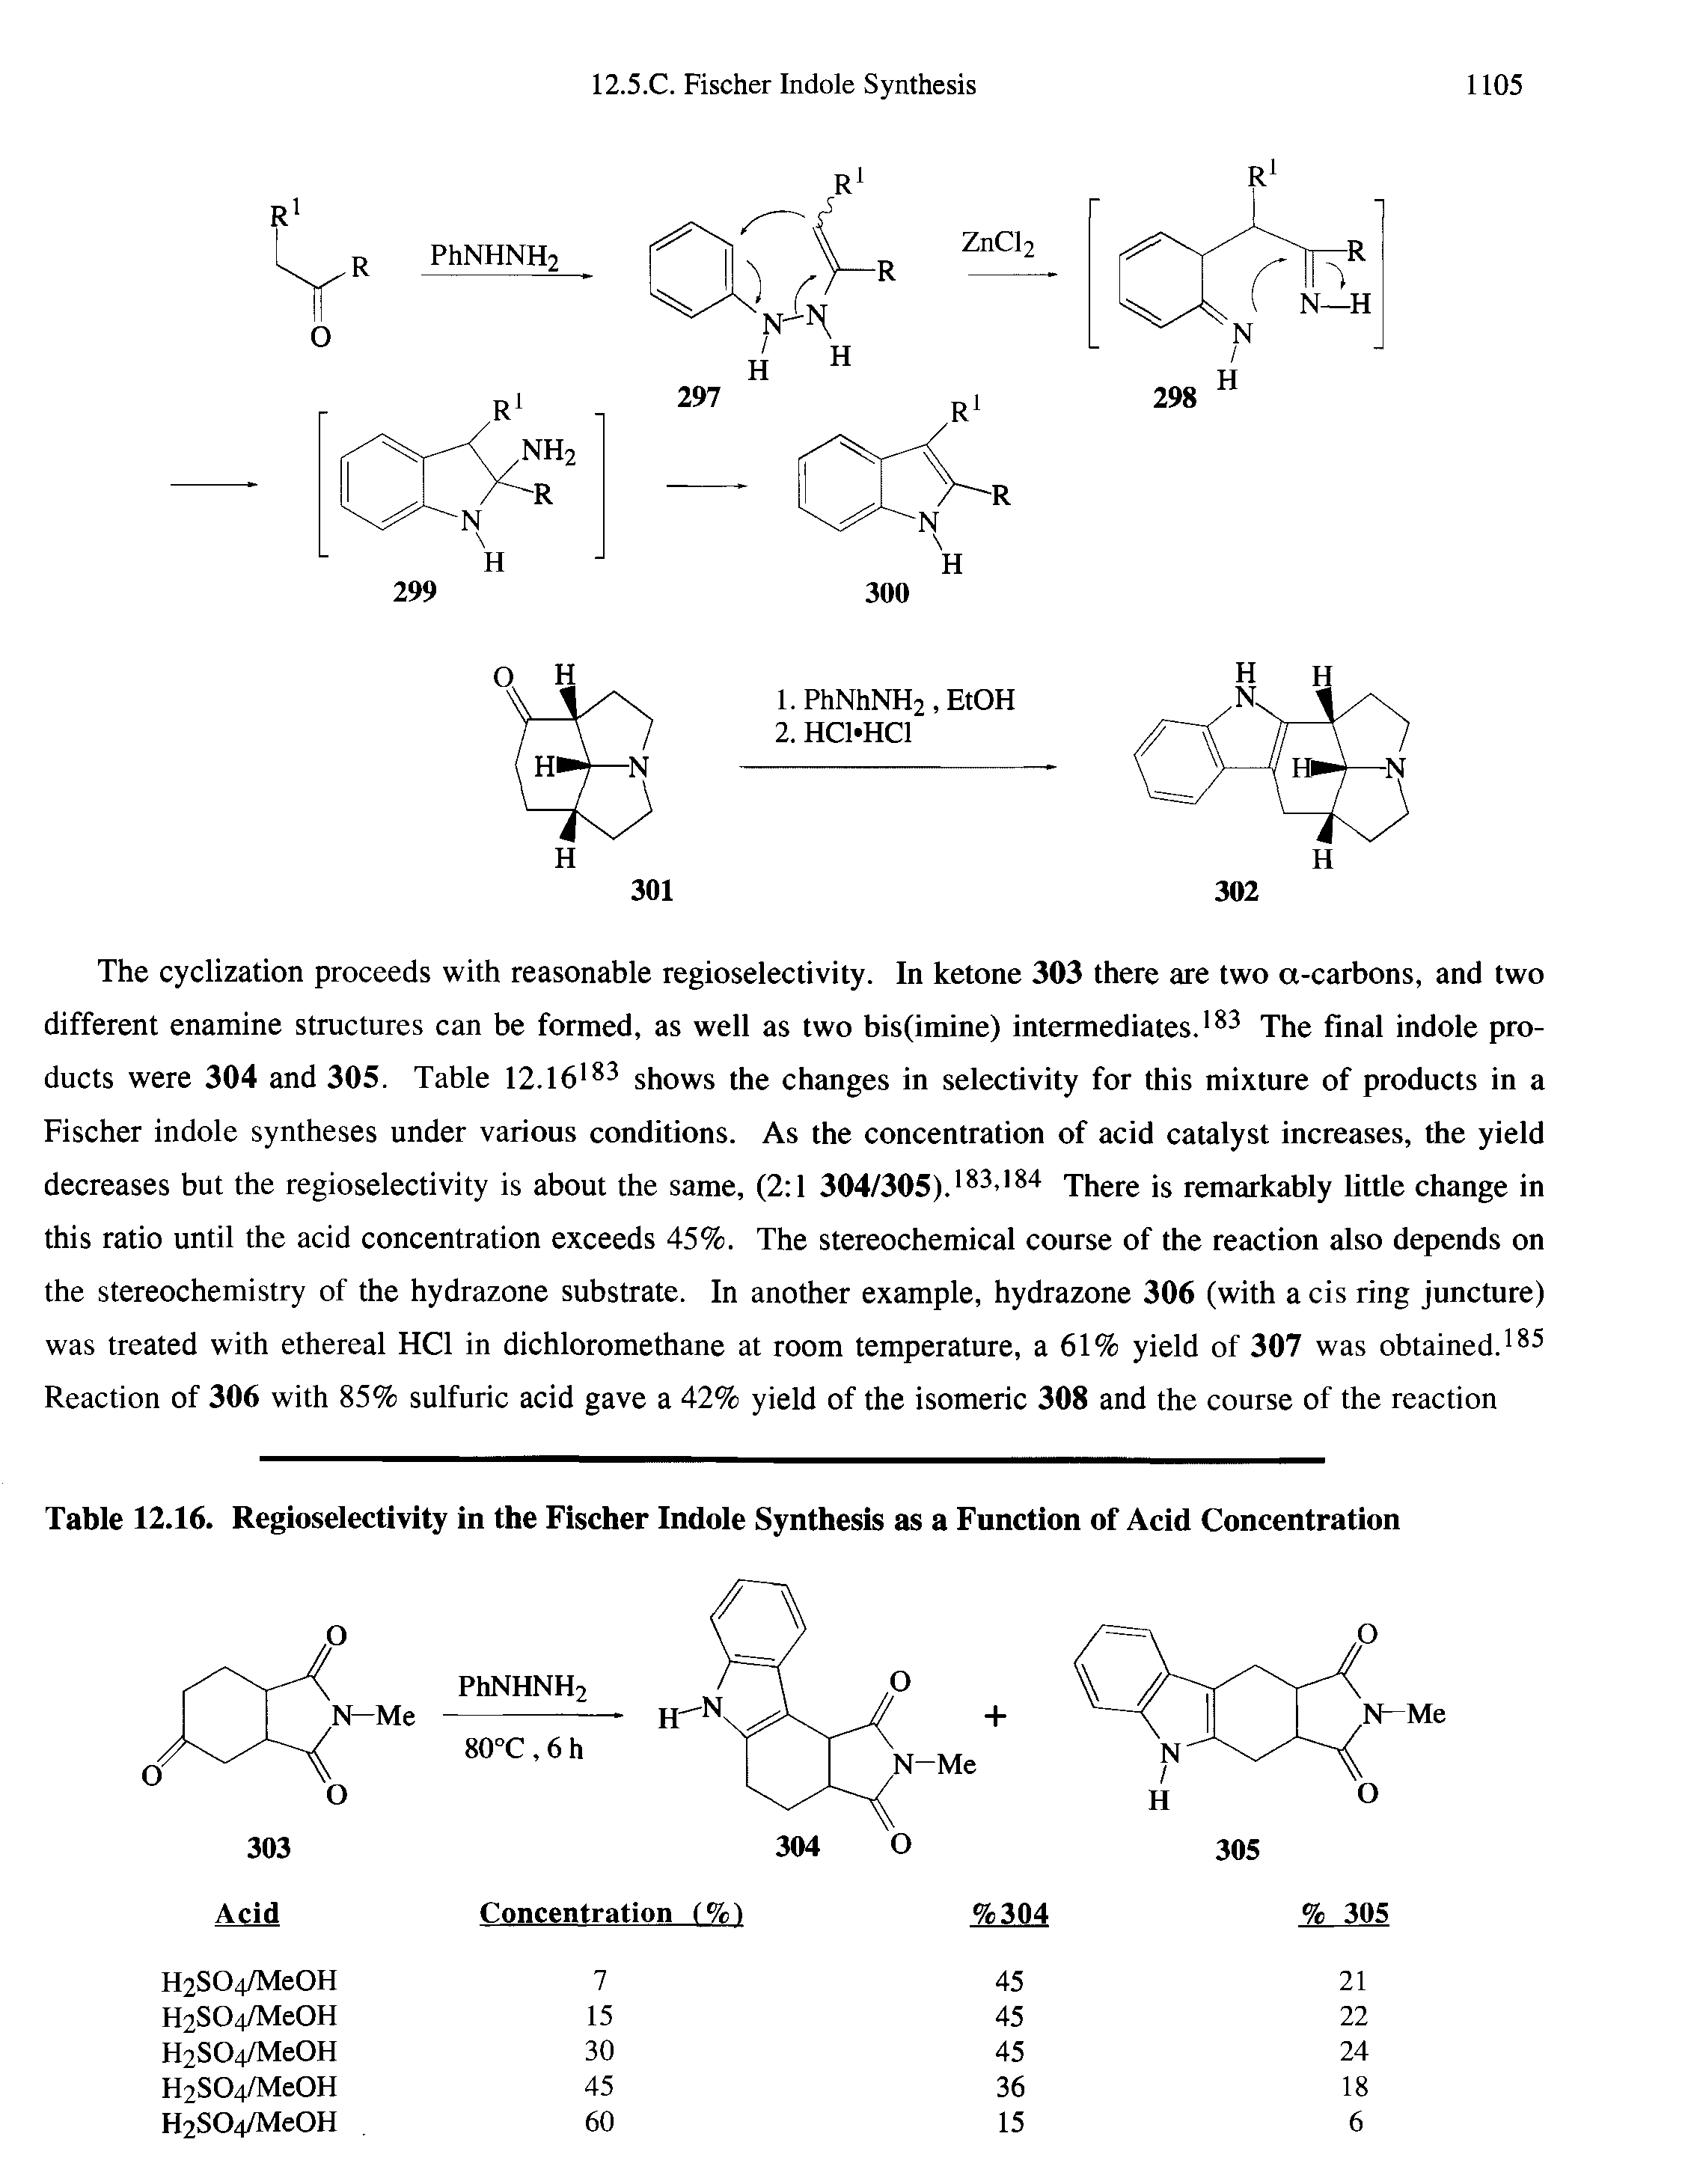 Table 12.16. Regioselectivity in the Fischer Indole Synthesis as a Function of Acid Concentration...